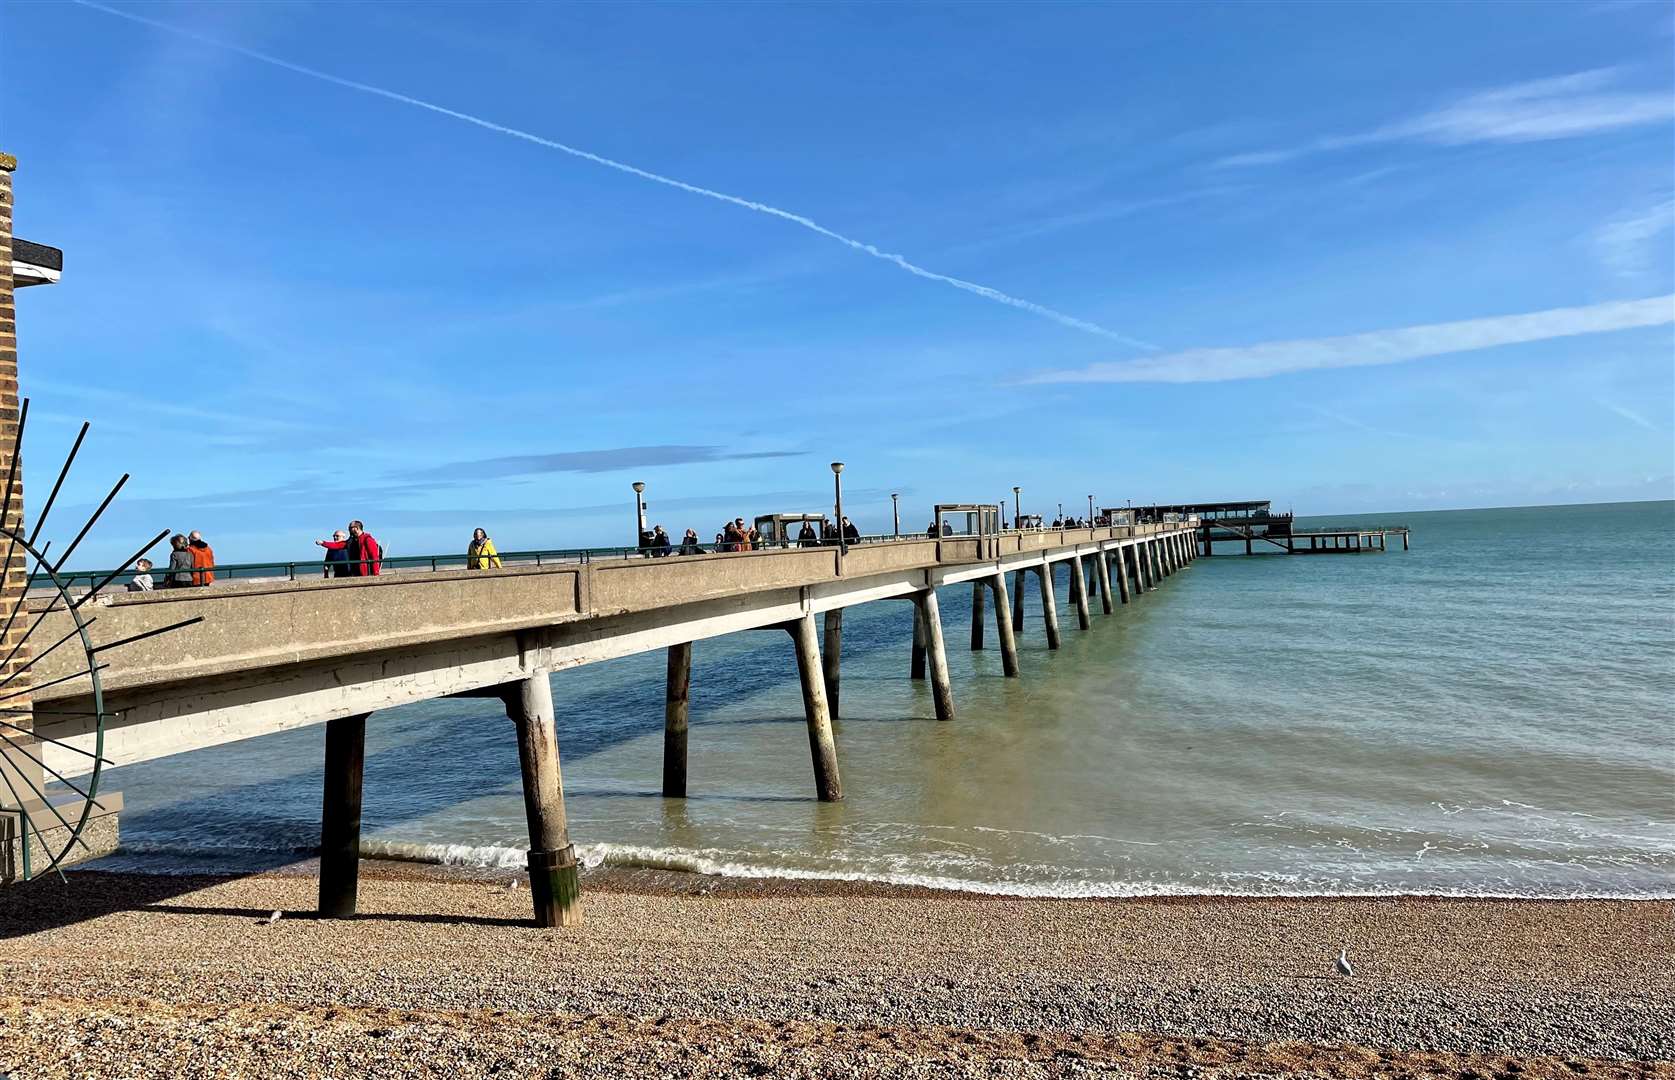 The route from Kingsdown to Deal will give you great views of Deal Castle and the seaside pier